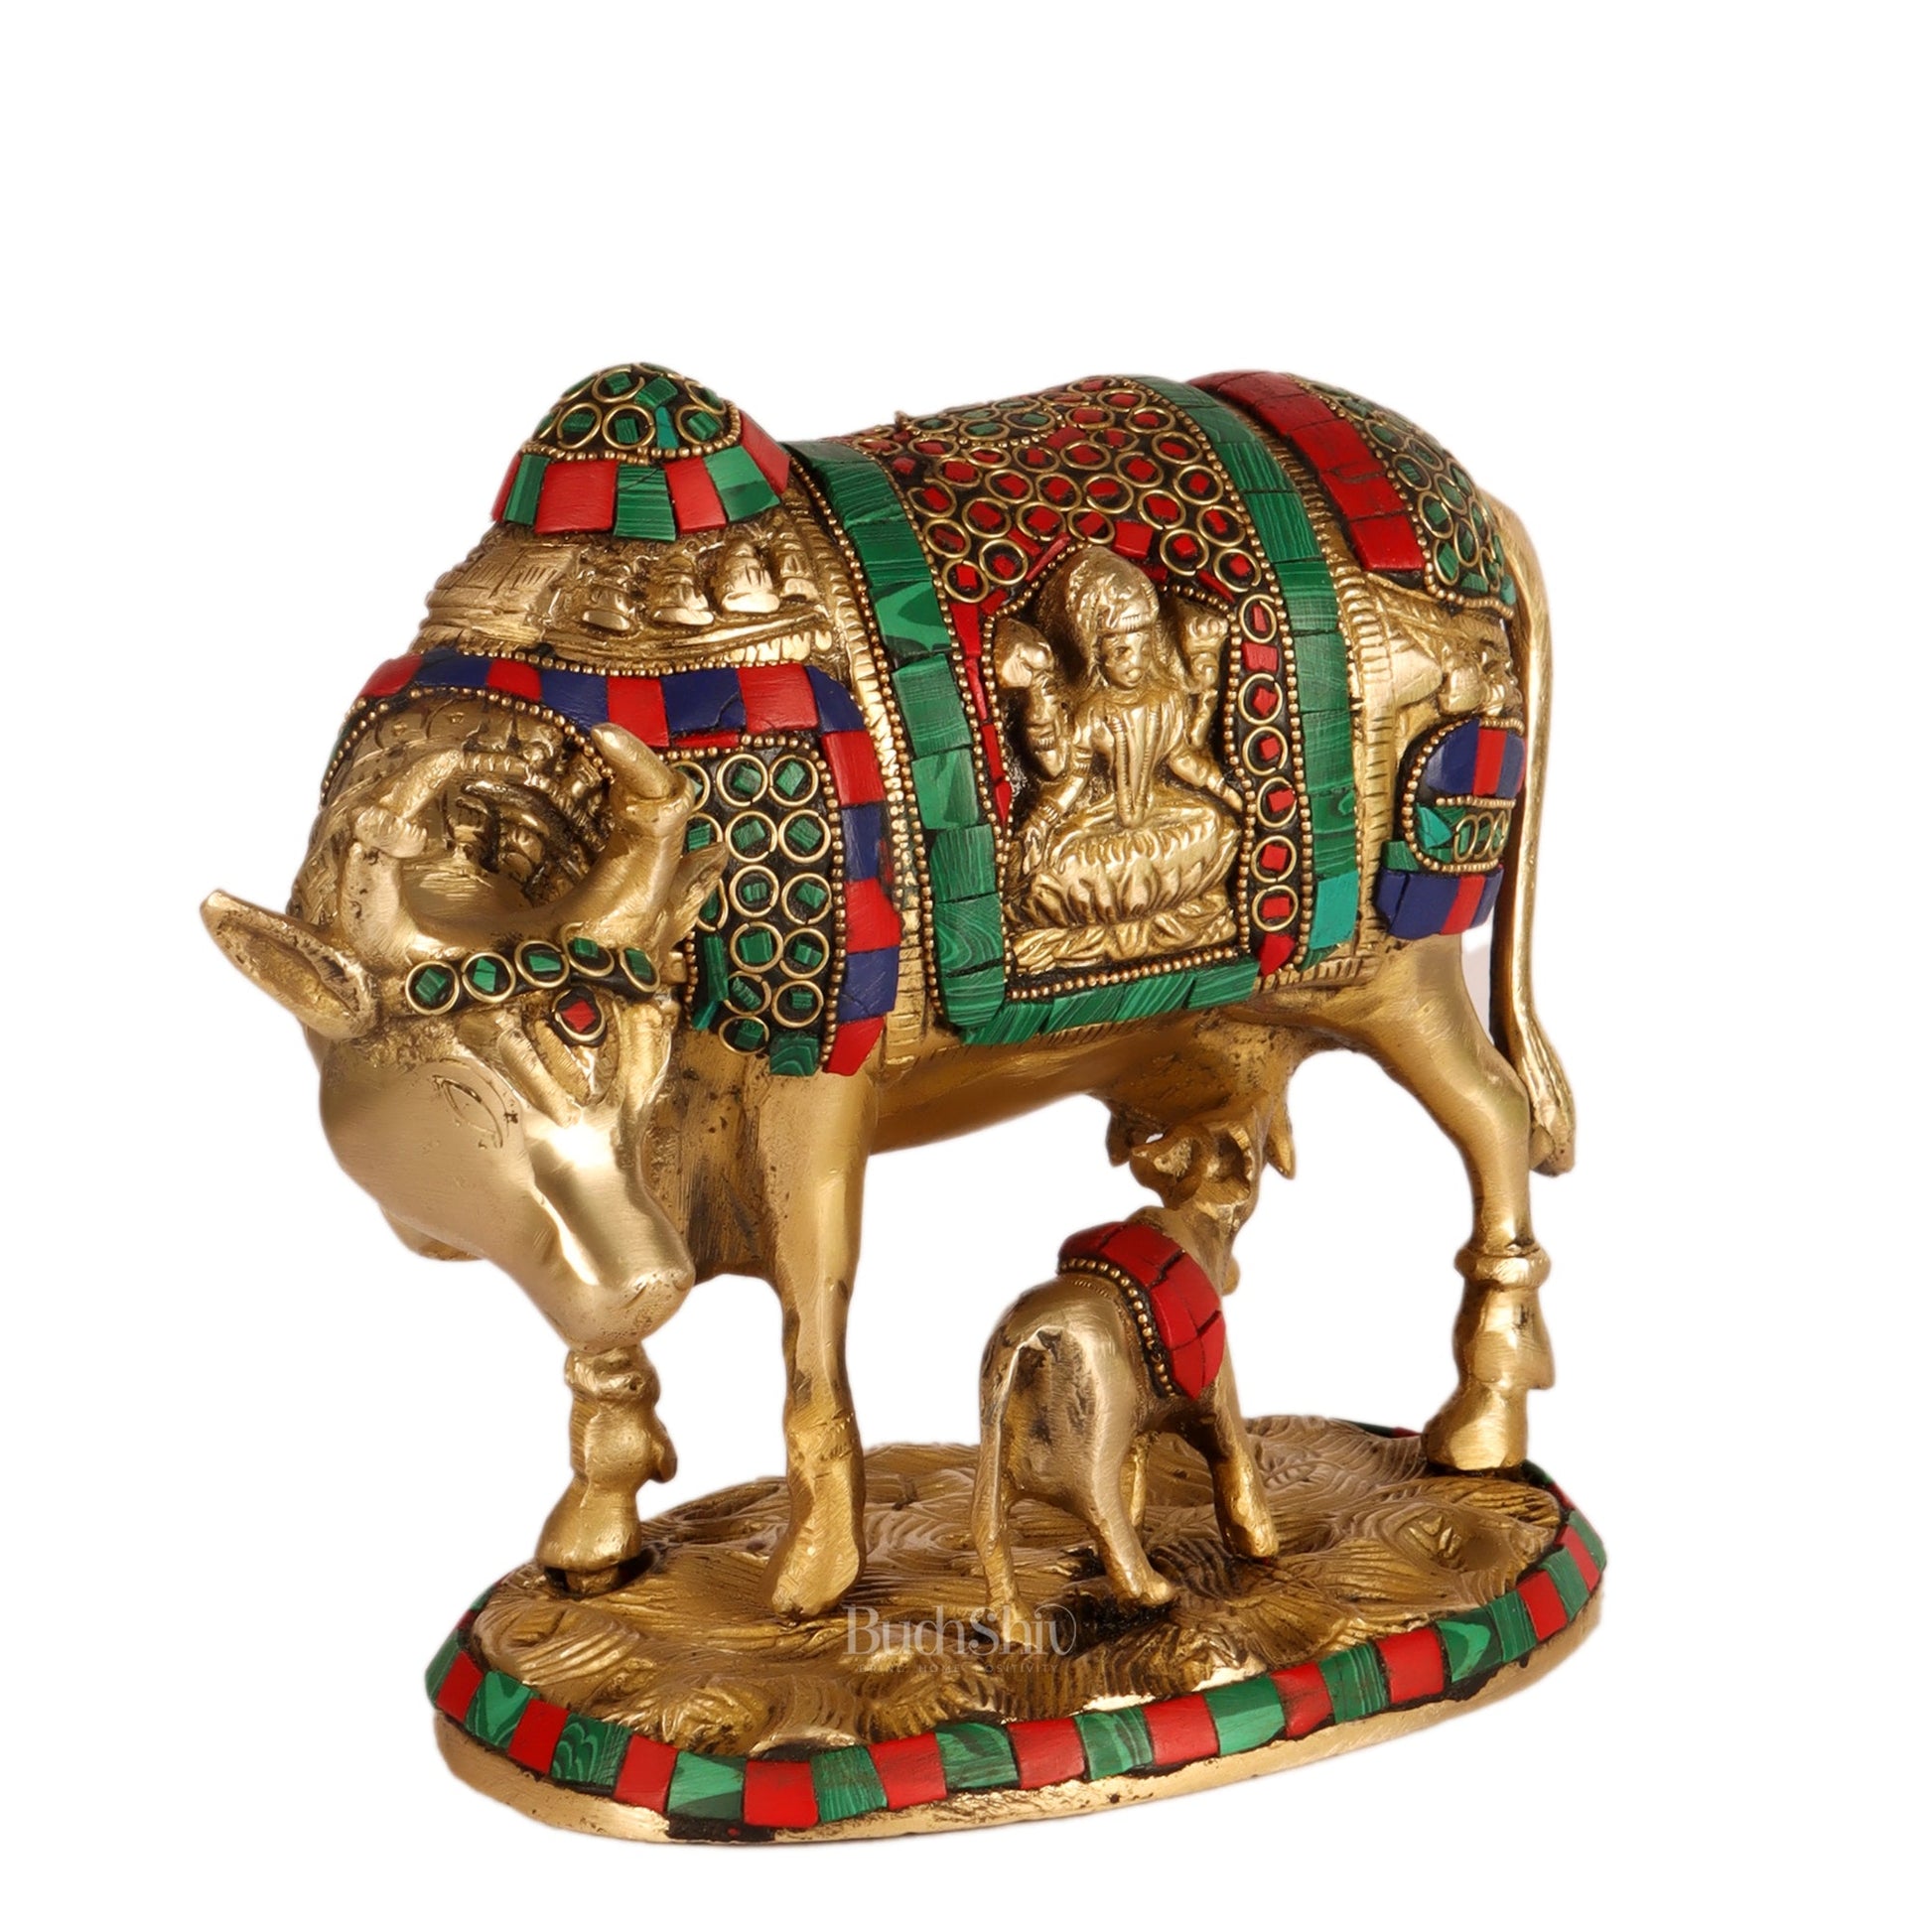 Handcrafted Brass Cow and Calf Statue | Ganesha and Lakshmi Carvings 8.5" - Budhshiv.com